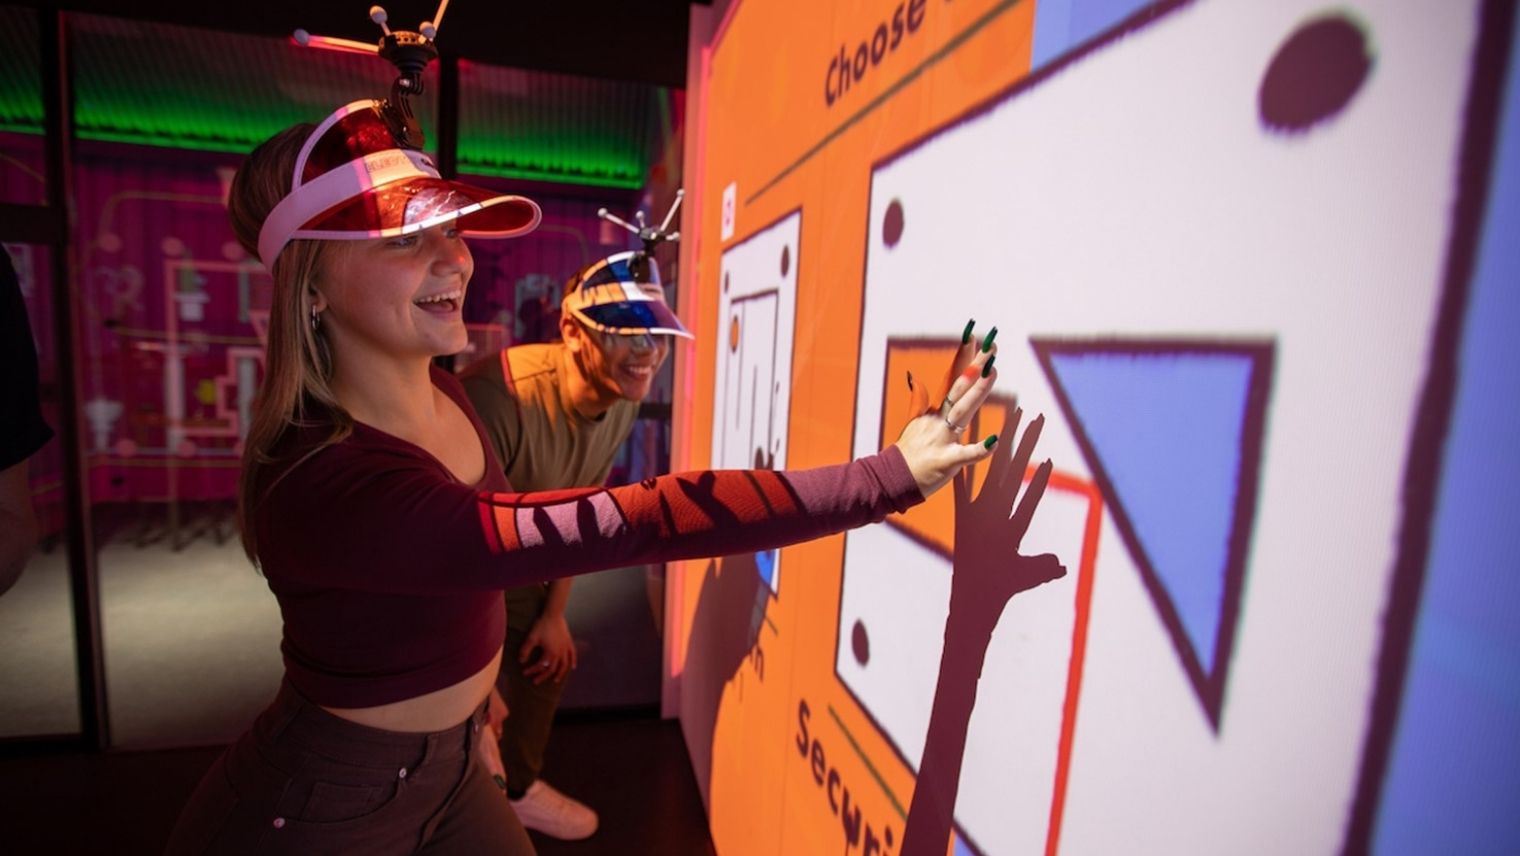 Players taking part in a game at Electric Gamebox Southbank